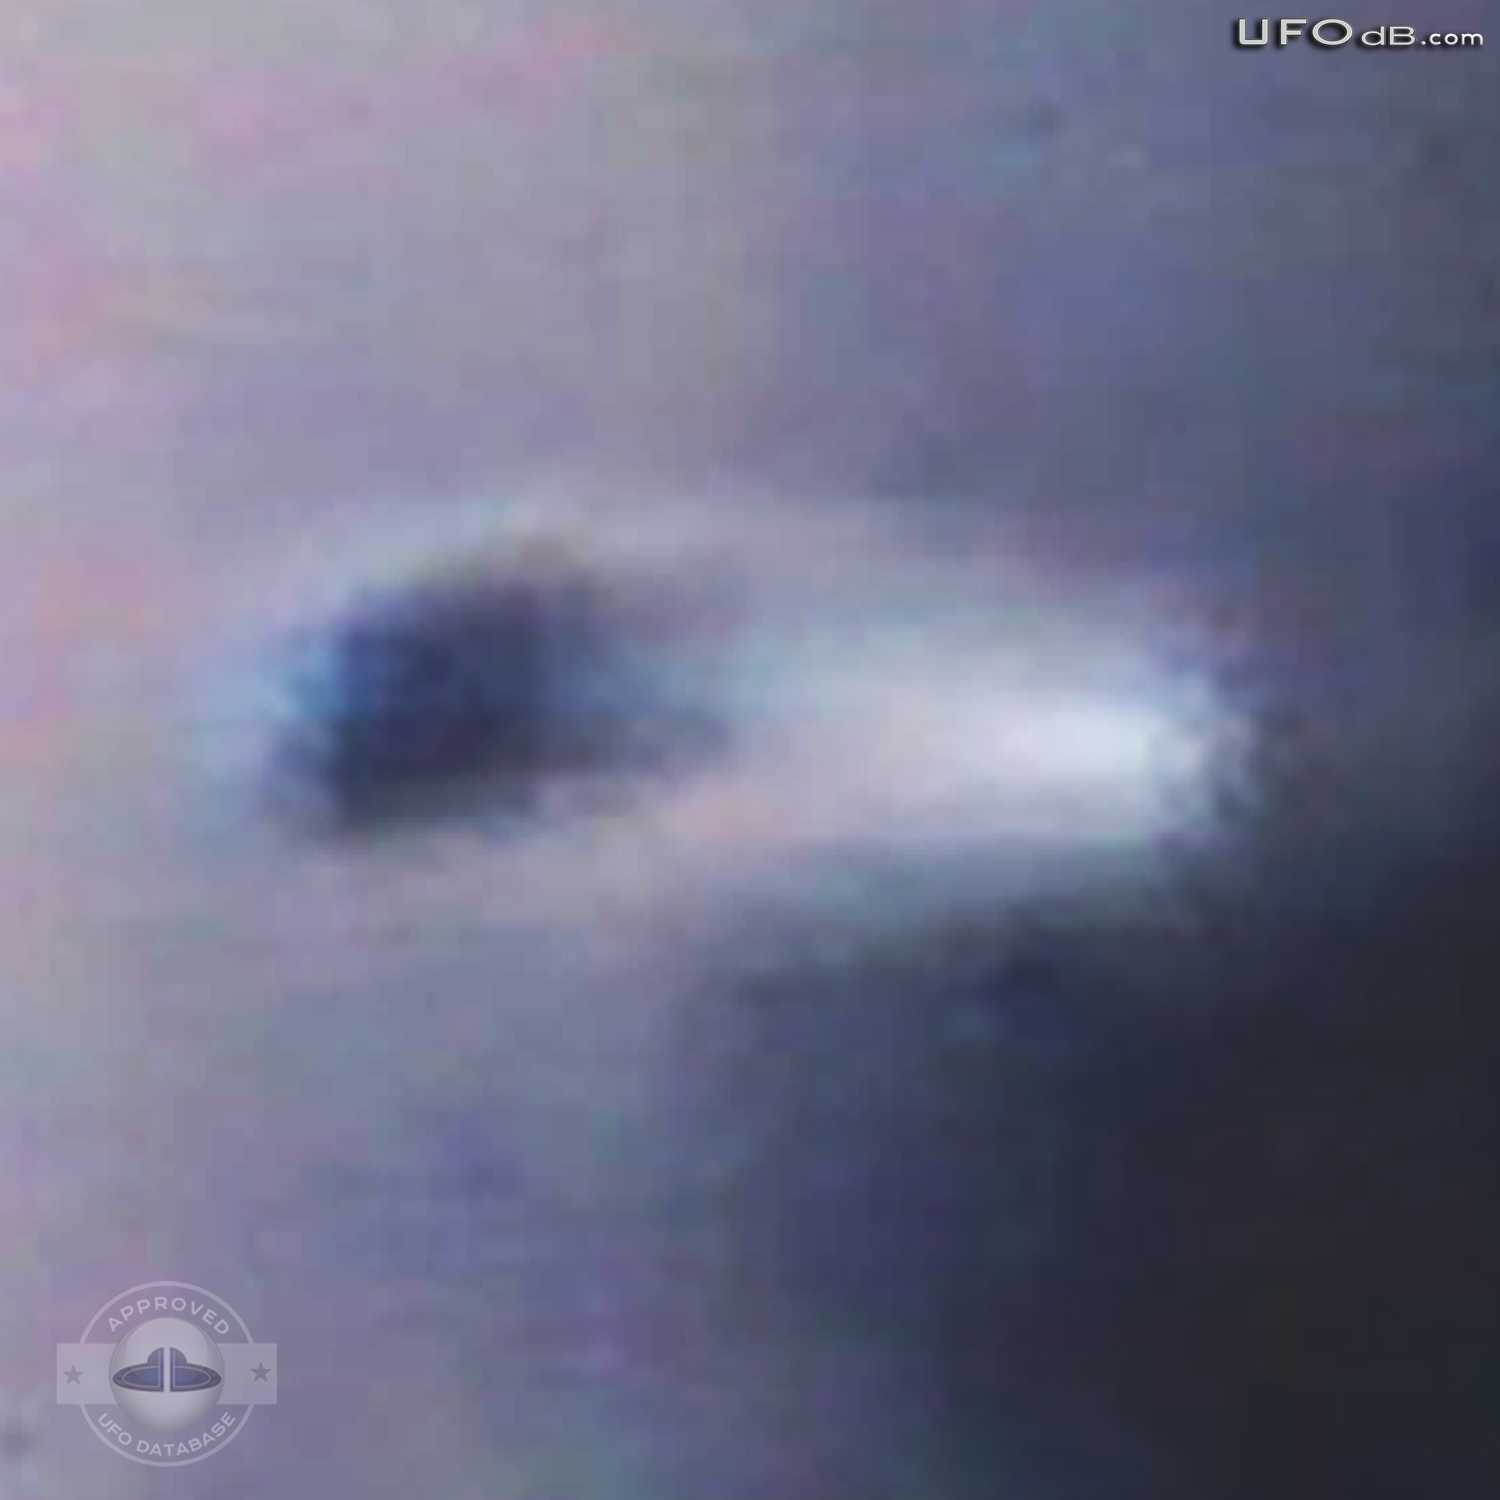 Fort Worth Texas Storm Picture reveals UFOs near clouds | May 24 2011 UFO Picture #343-6